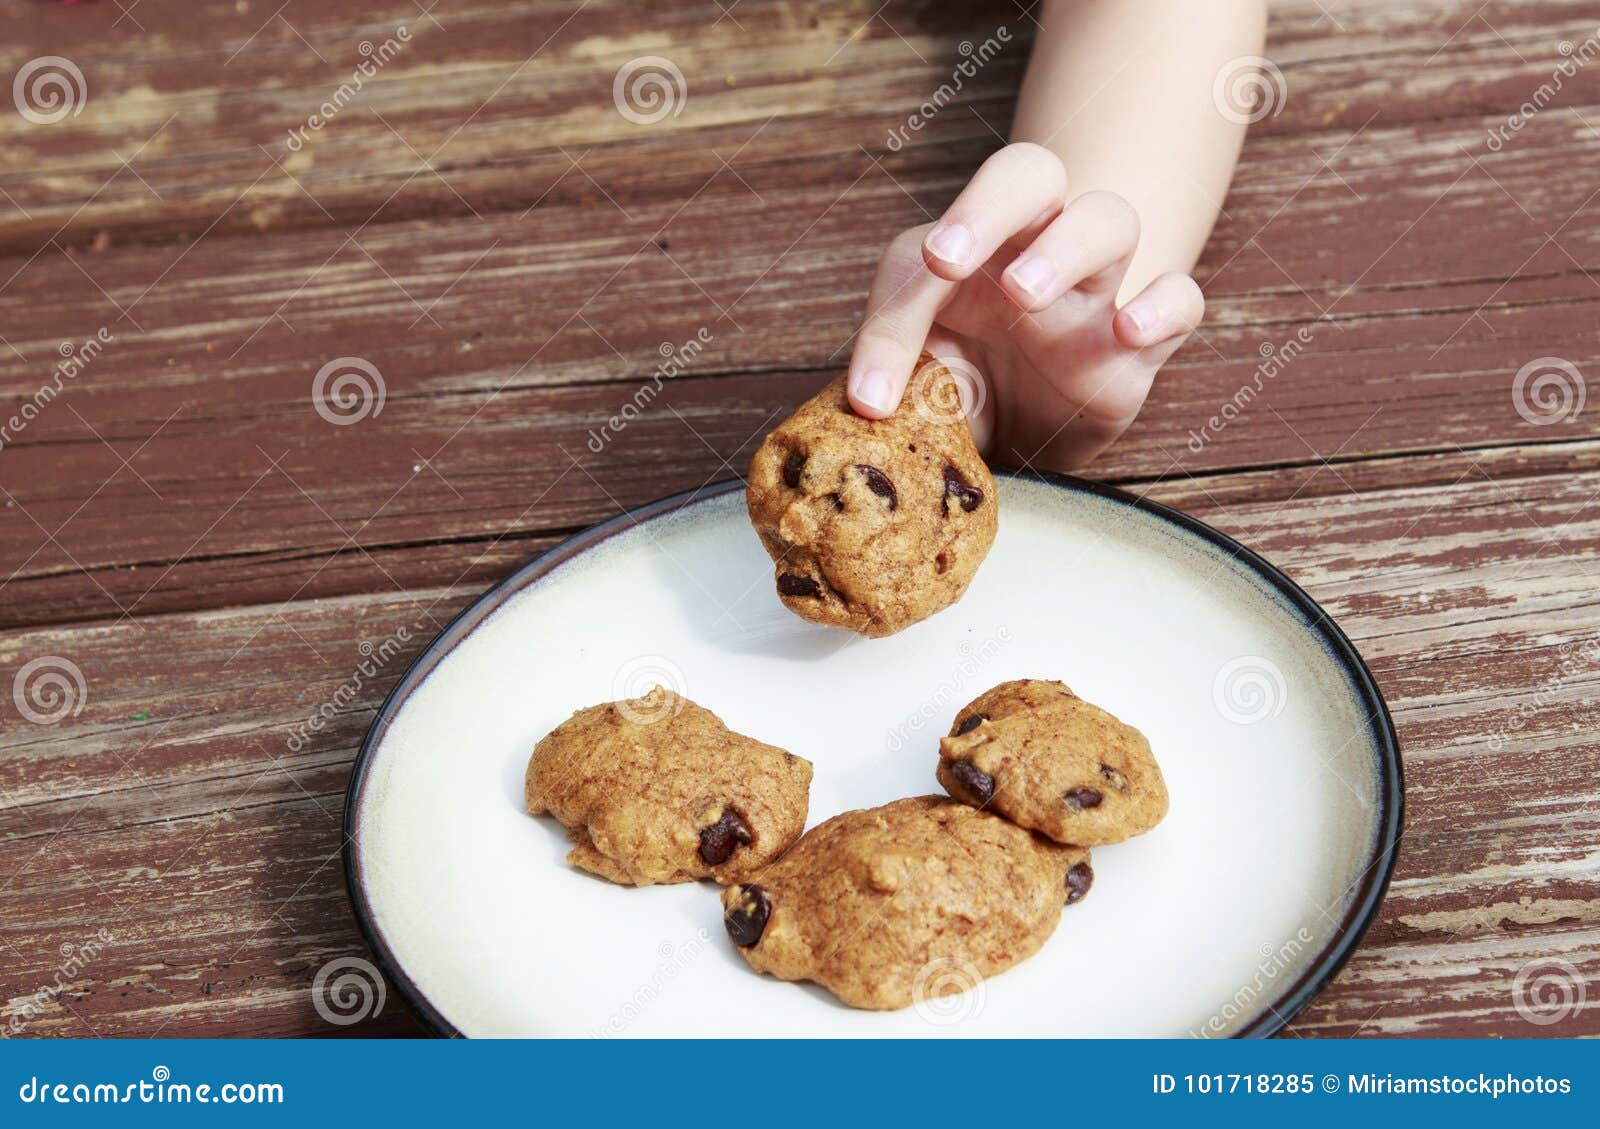 child stealing a pumpkin chocolate chip cookie from a plate.